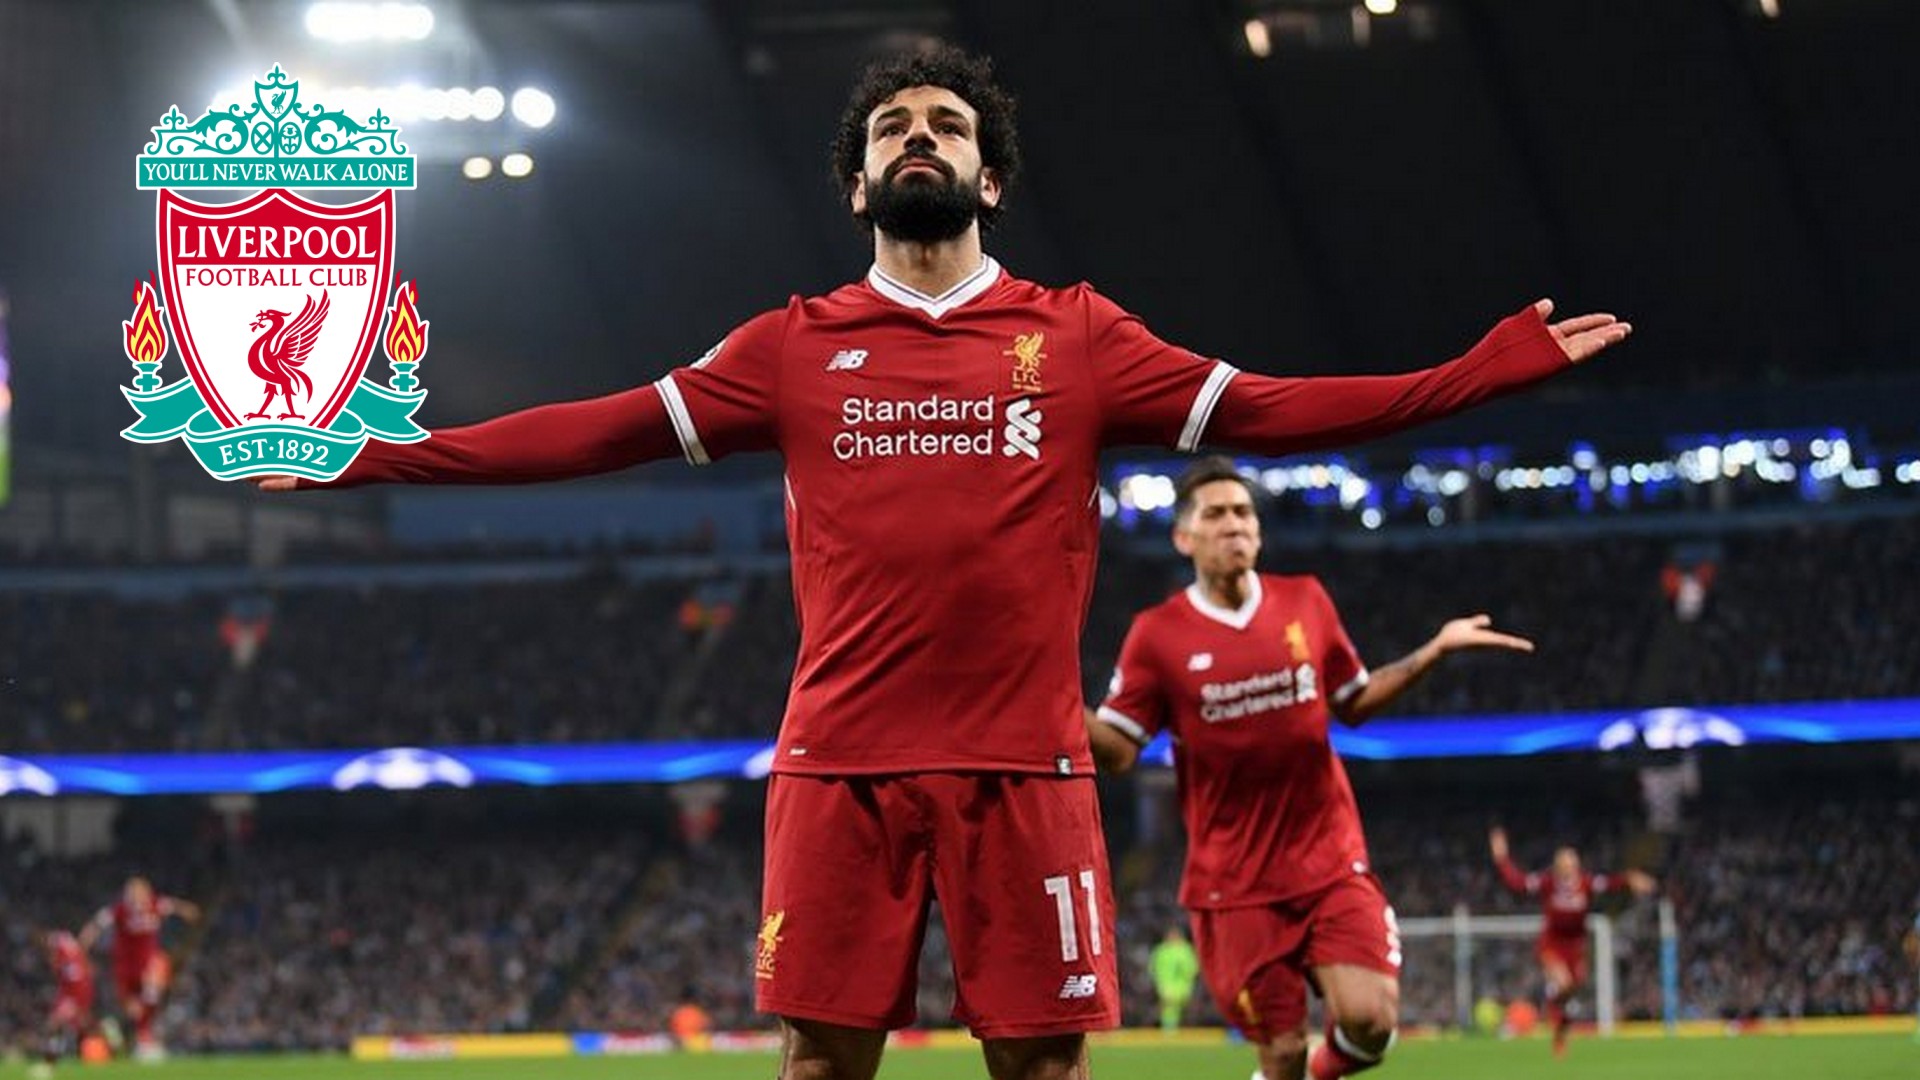 Wallpaper Liverpool Mohamed Salah with resolution 1920X1080 pixel. You can use this wallpaper as background for your desktop Computer Screensavers, Android or iPhone smartphones